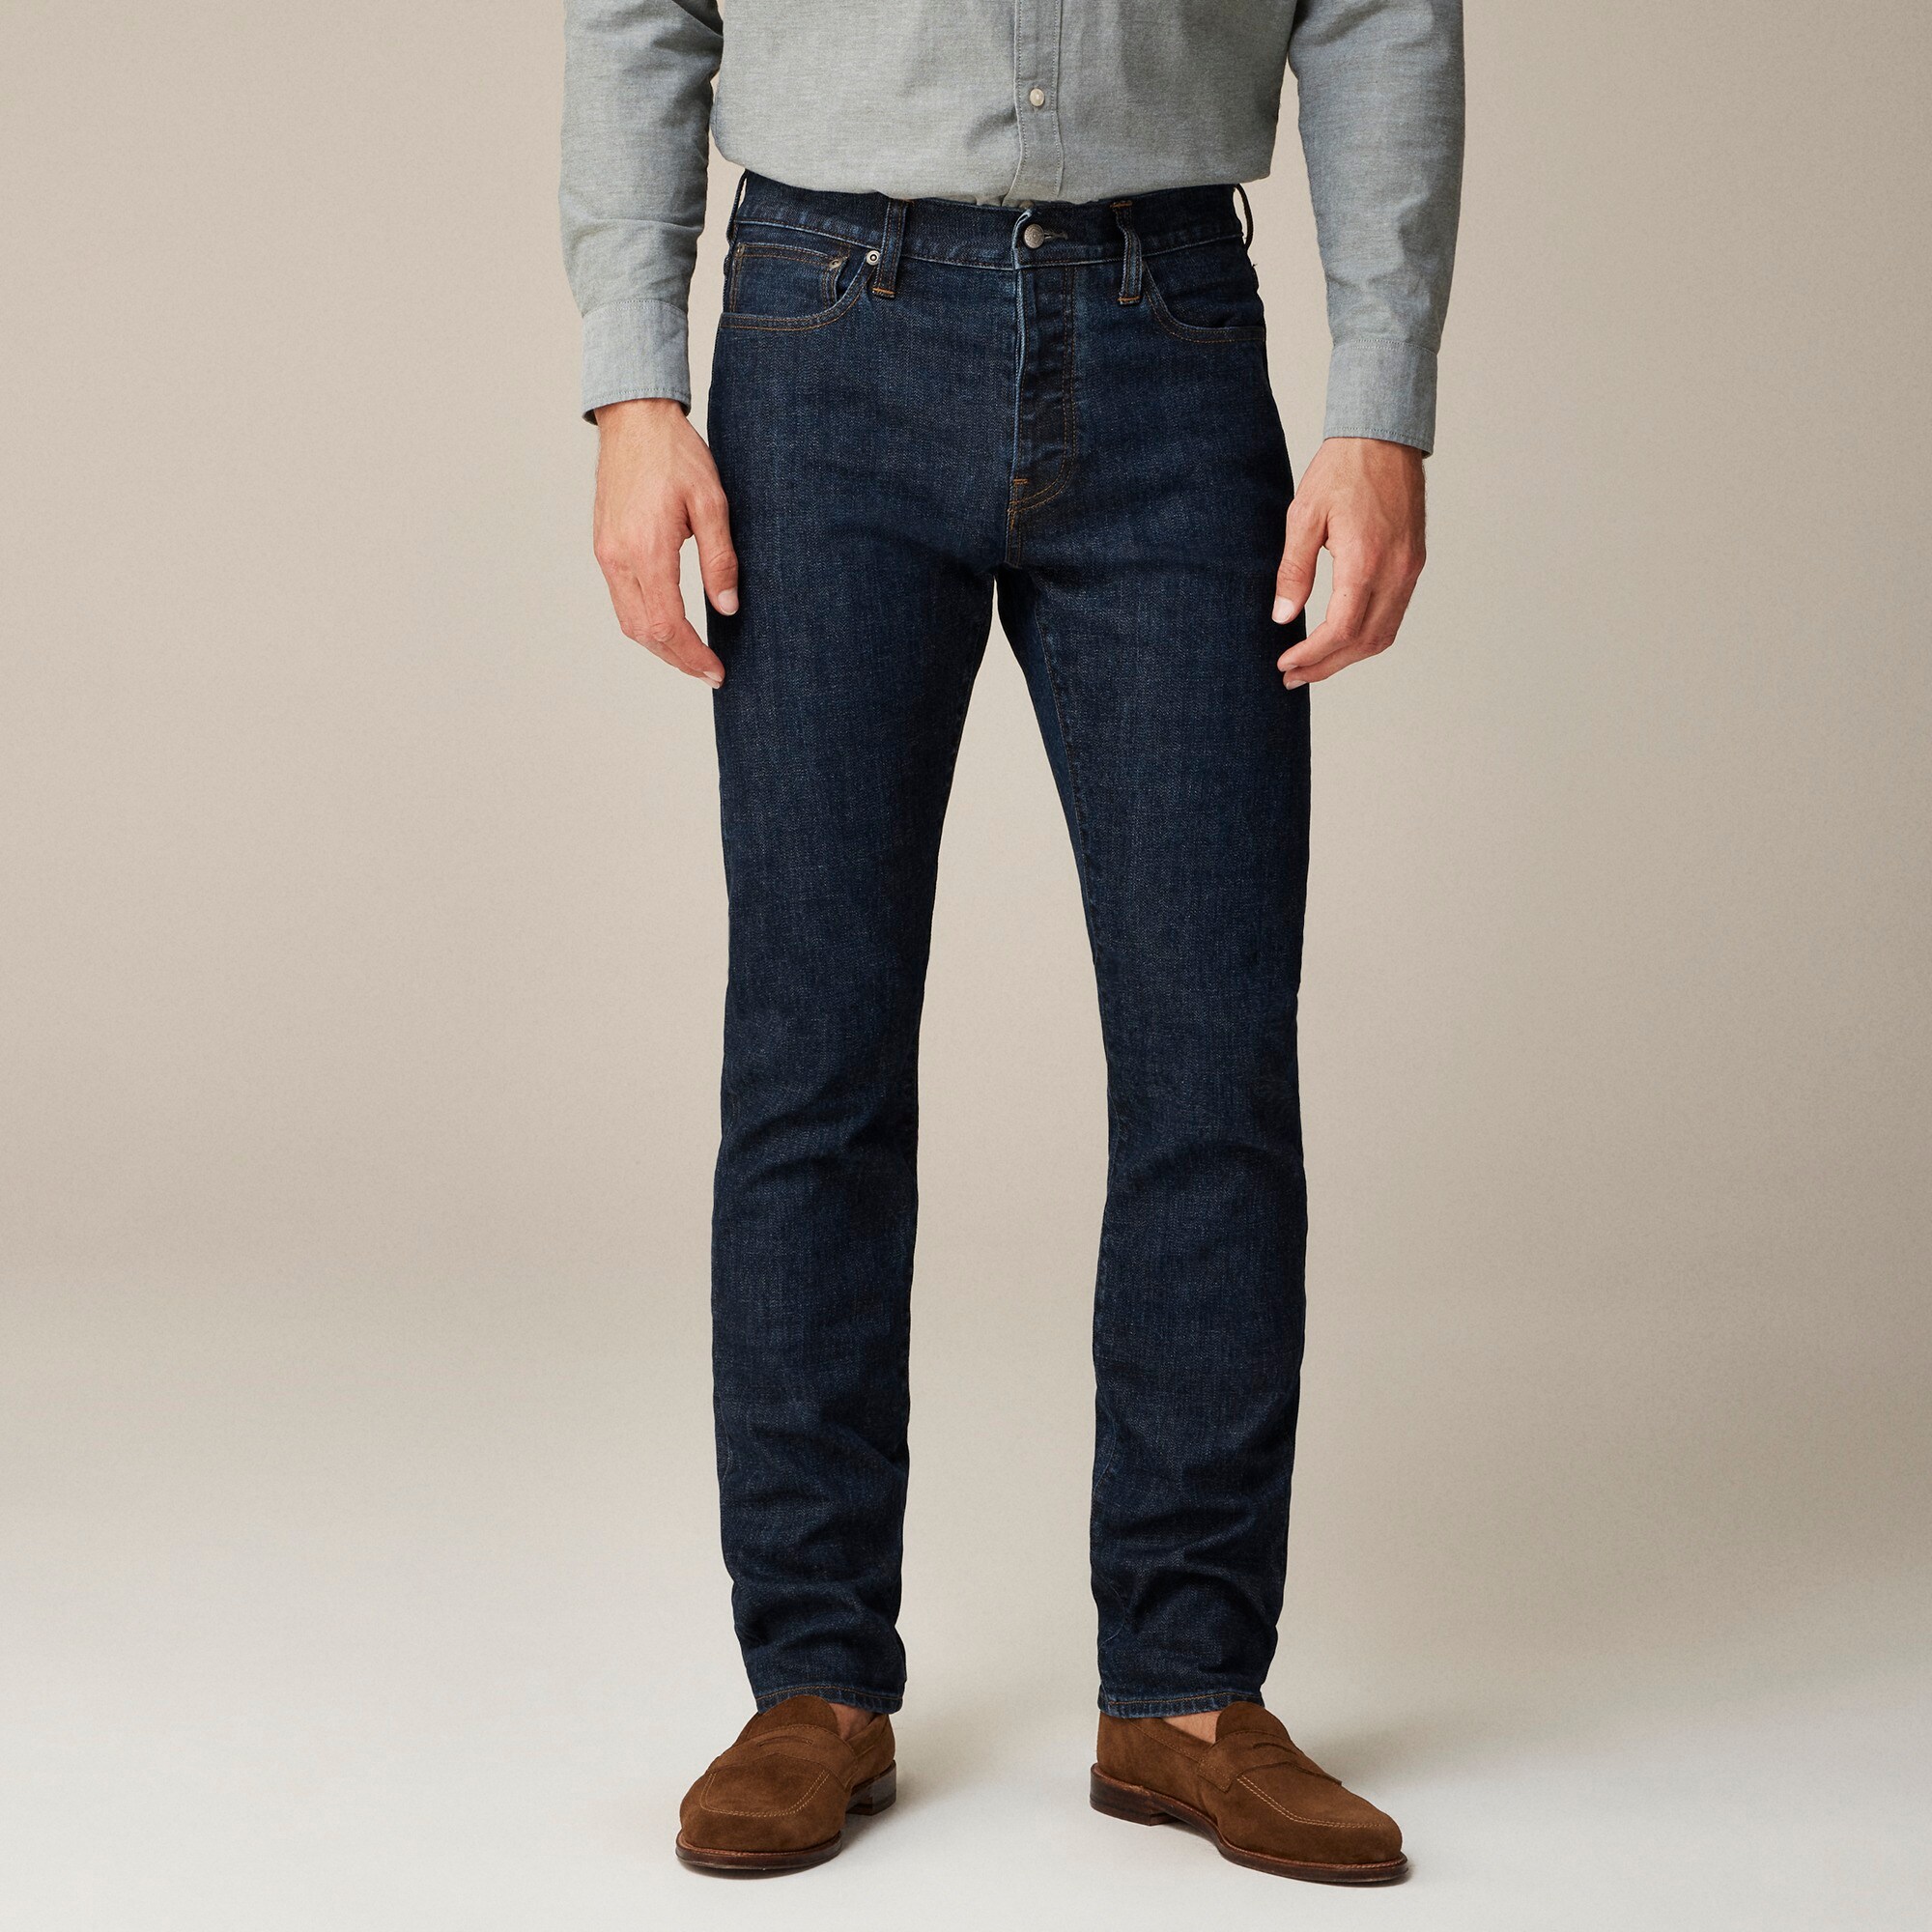  770&trade; Straight-fit jean in Japanese stretch selvedge denim